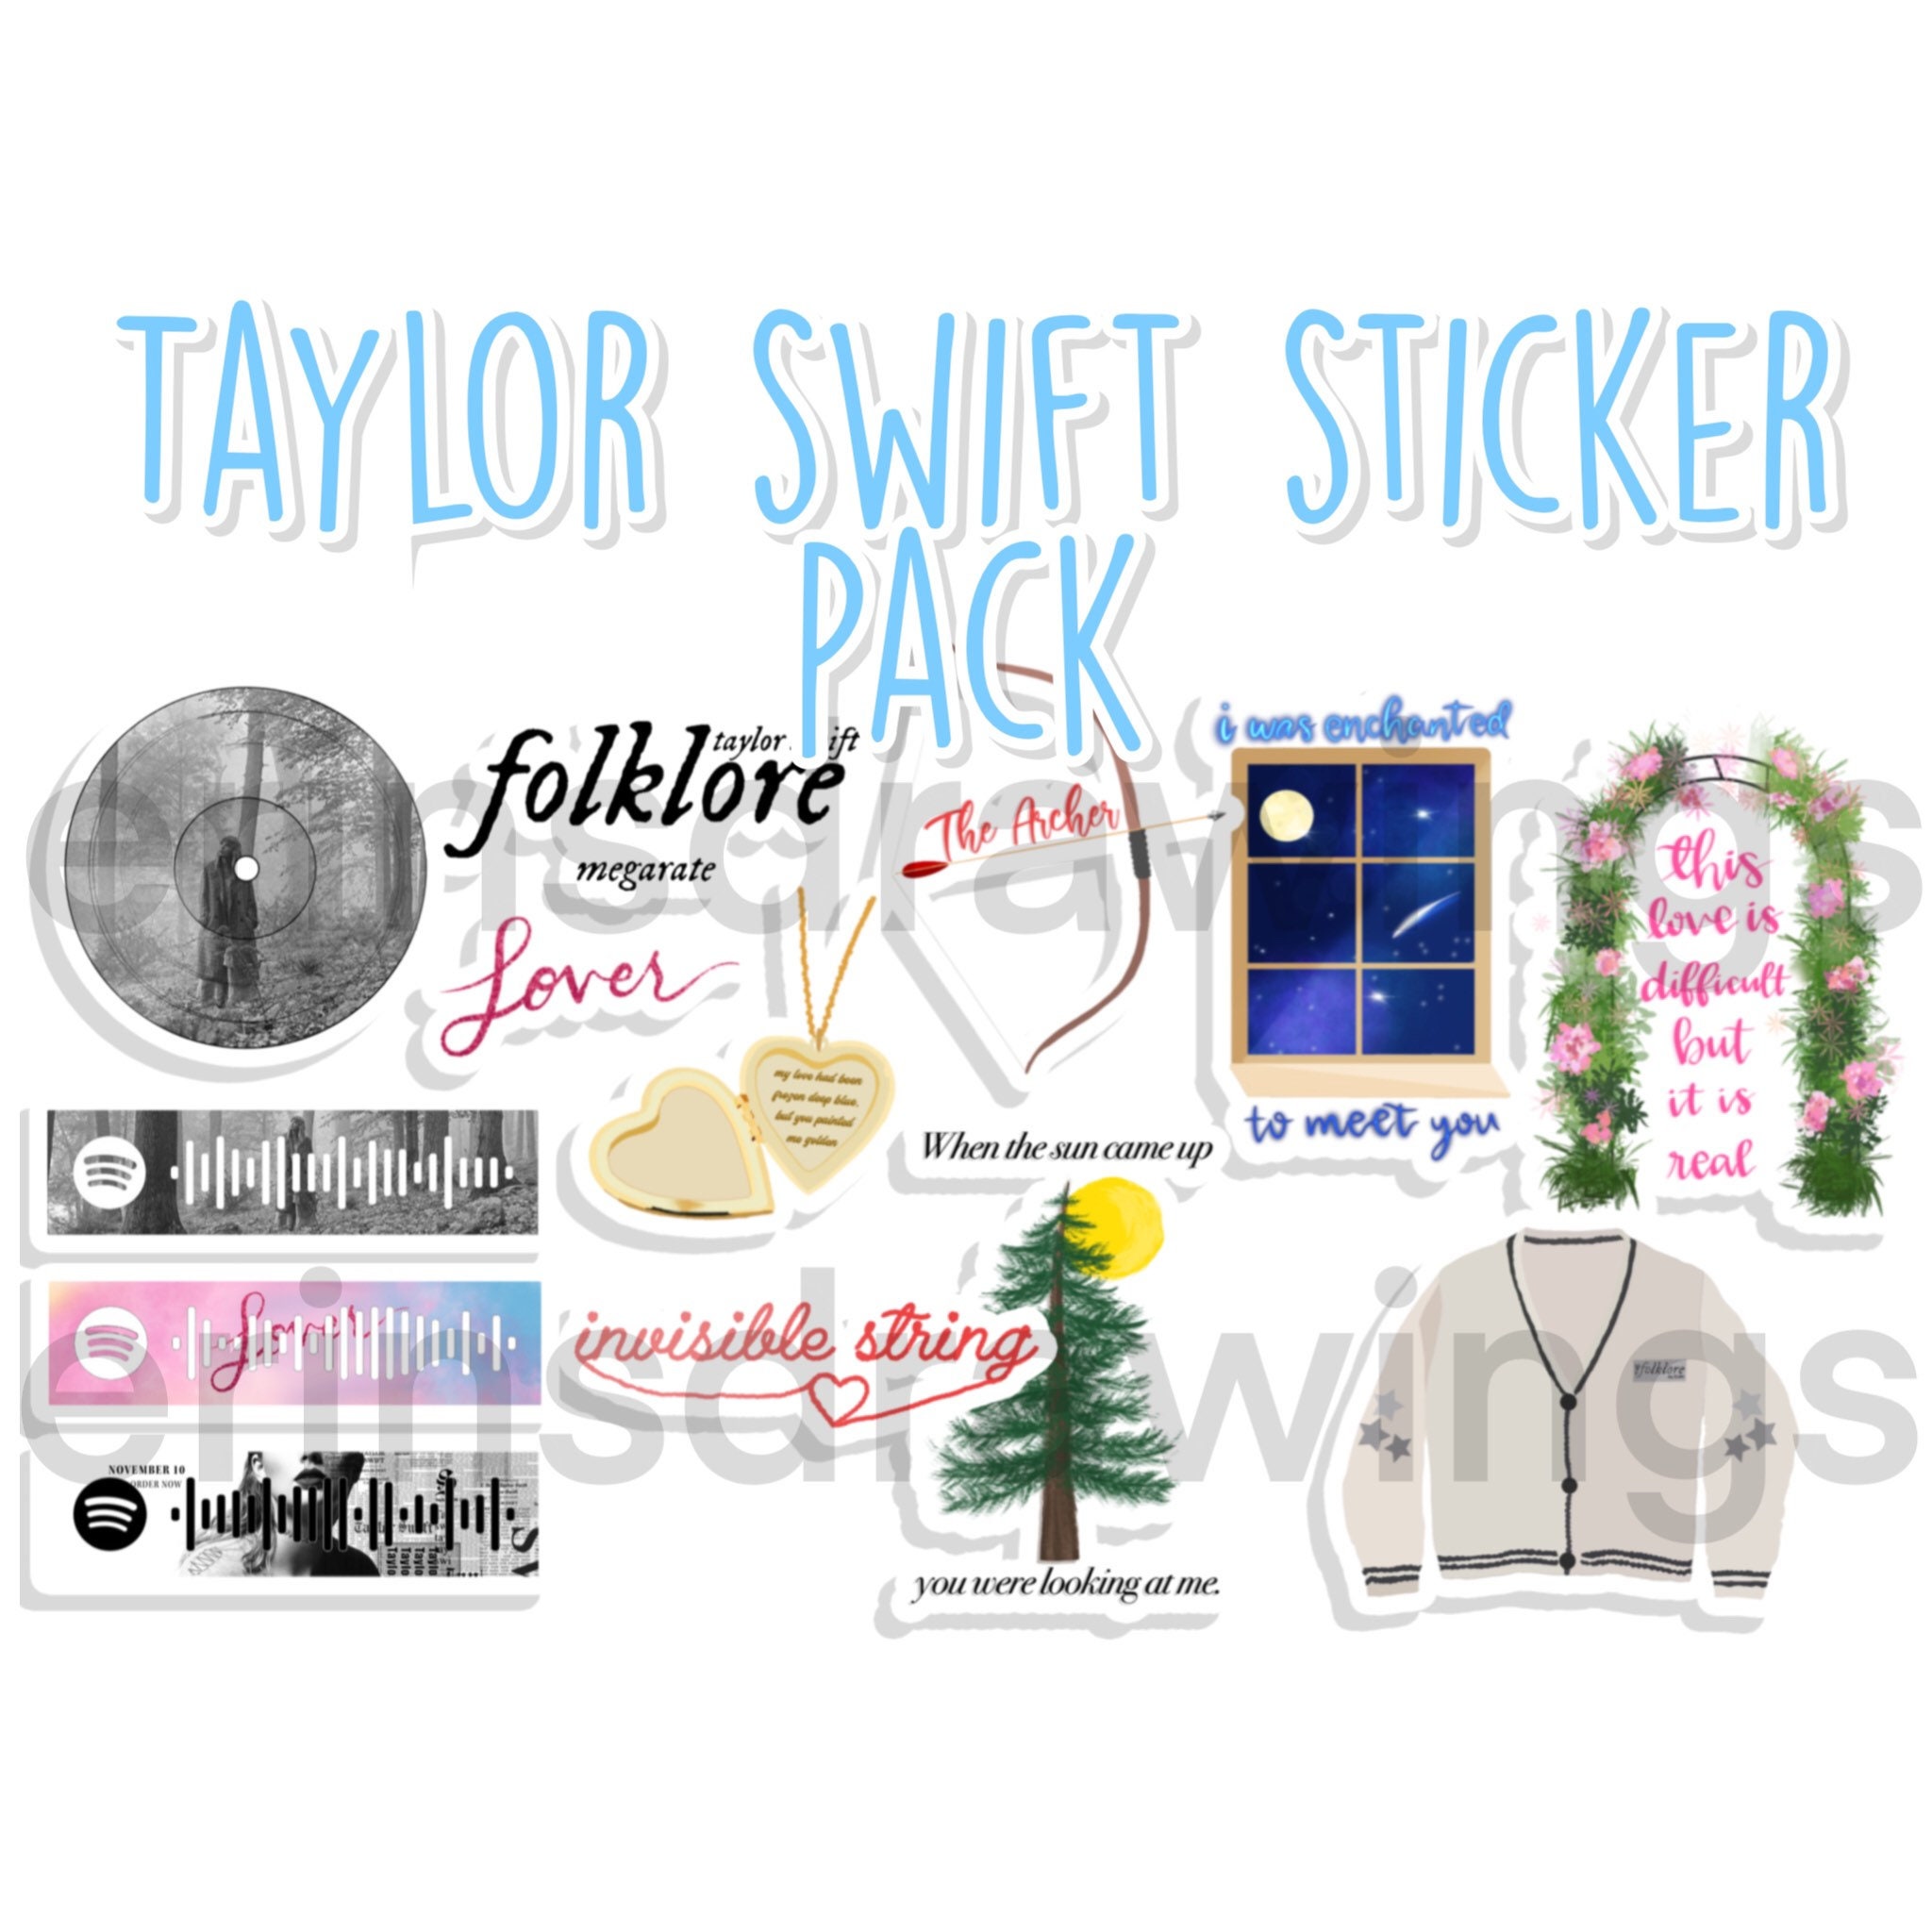 Debut Cake Stickers Aesthetic Cake Stickers Taylor Swift Stickers